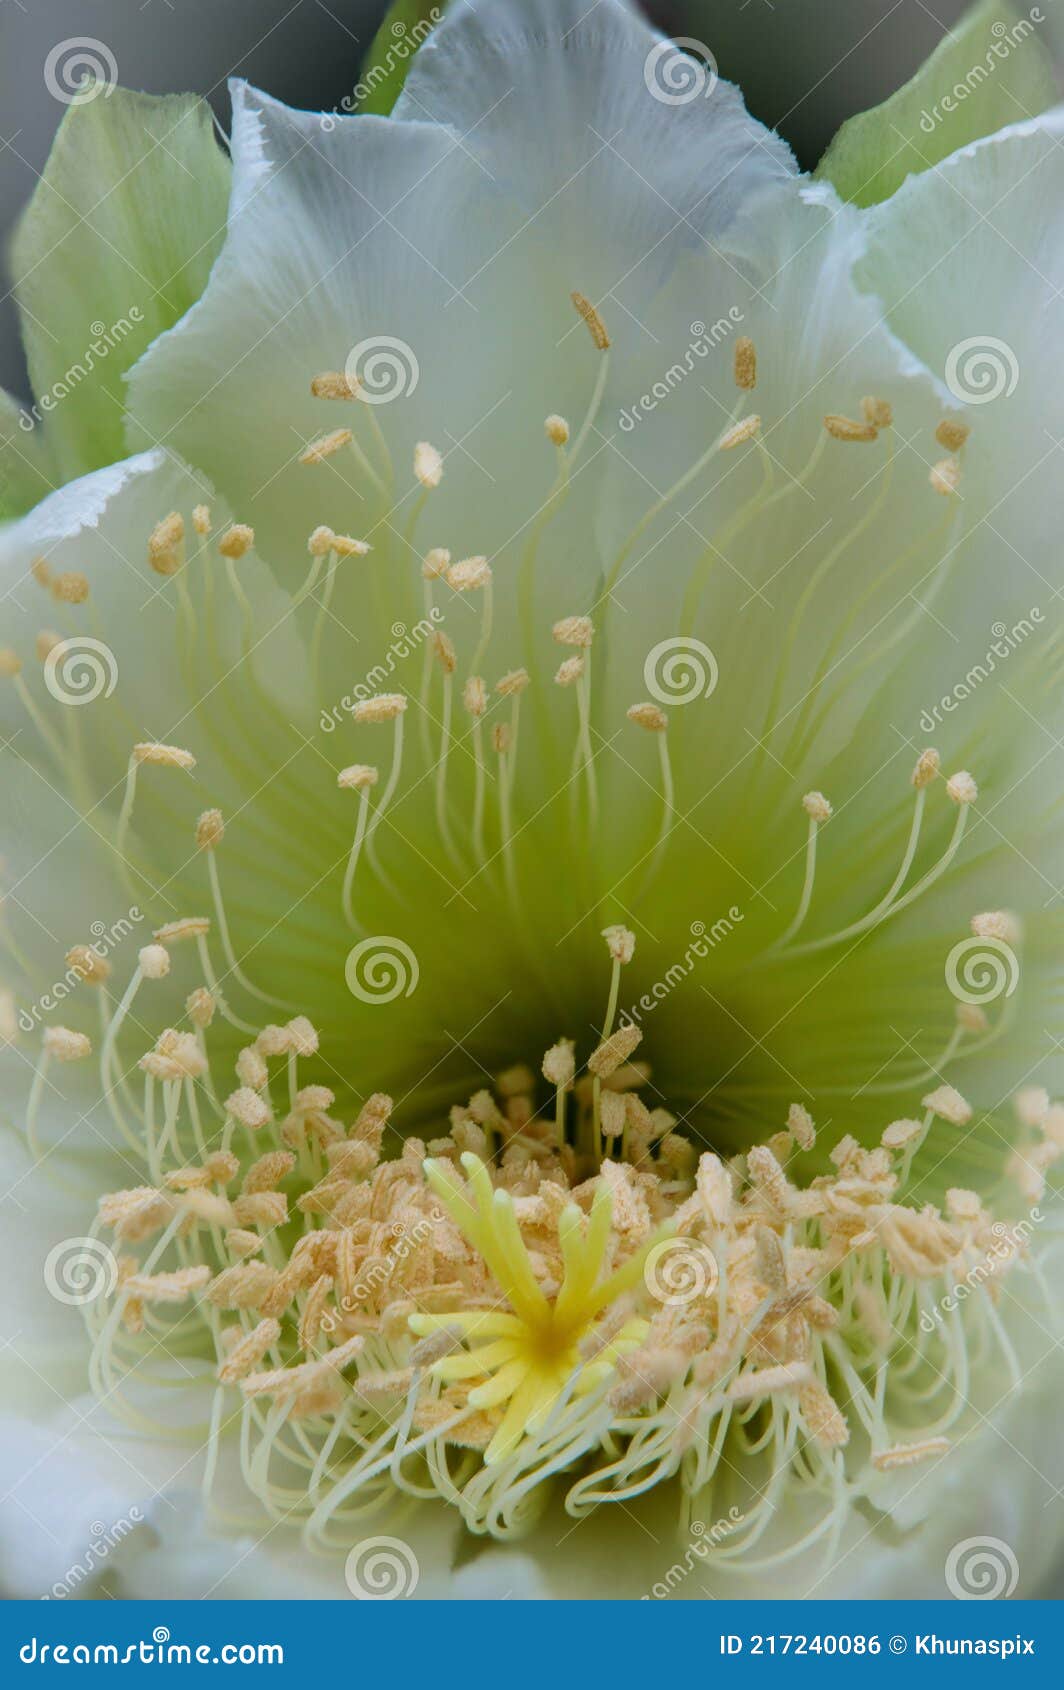 close up of fairly castle cactus blooming